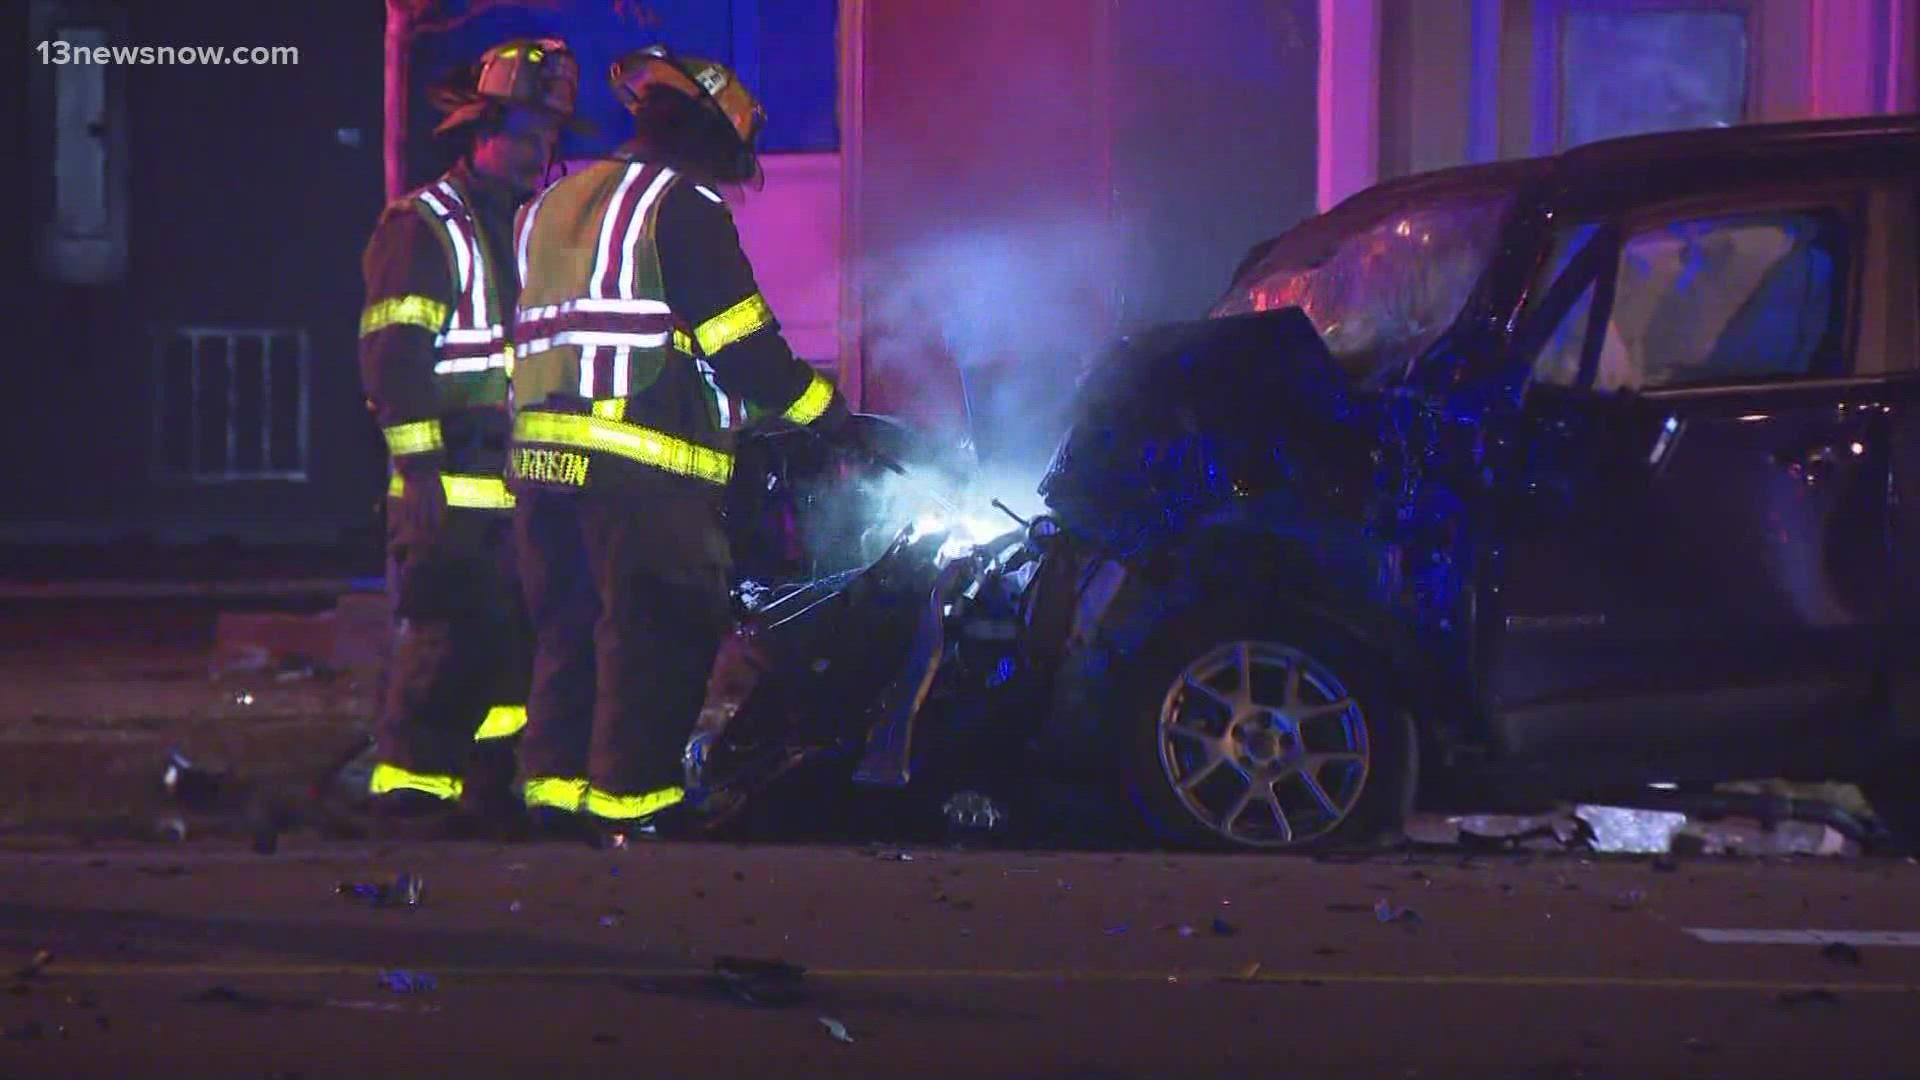 A police chase that started in Chesapeake ended with a car inside a Norfolk building.